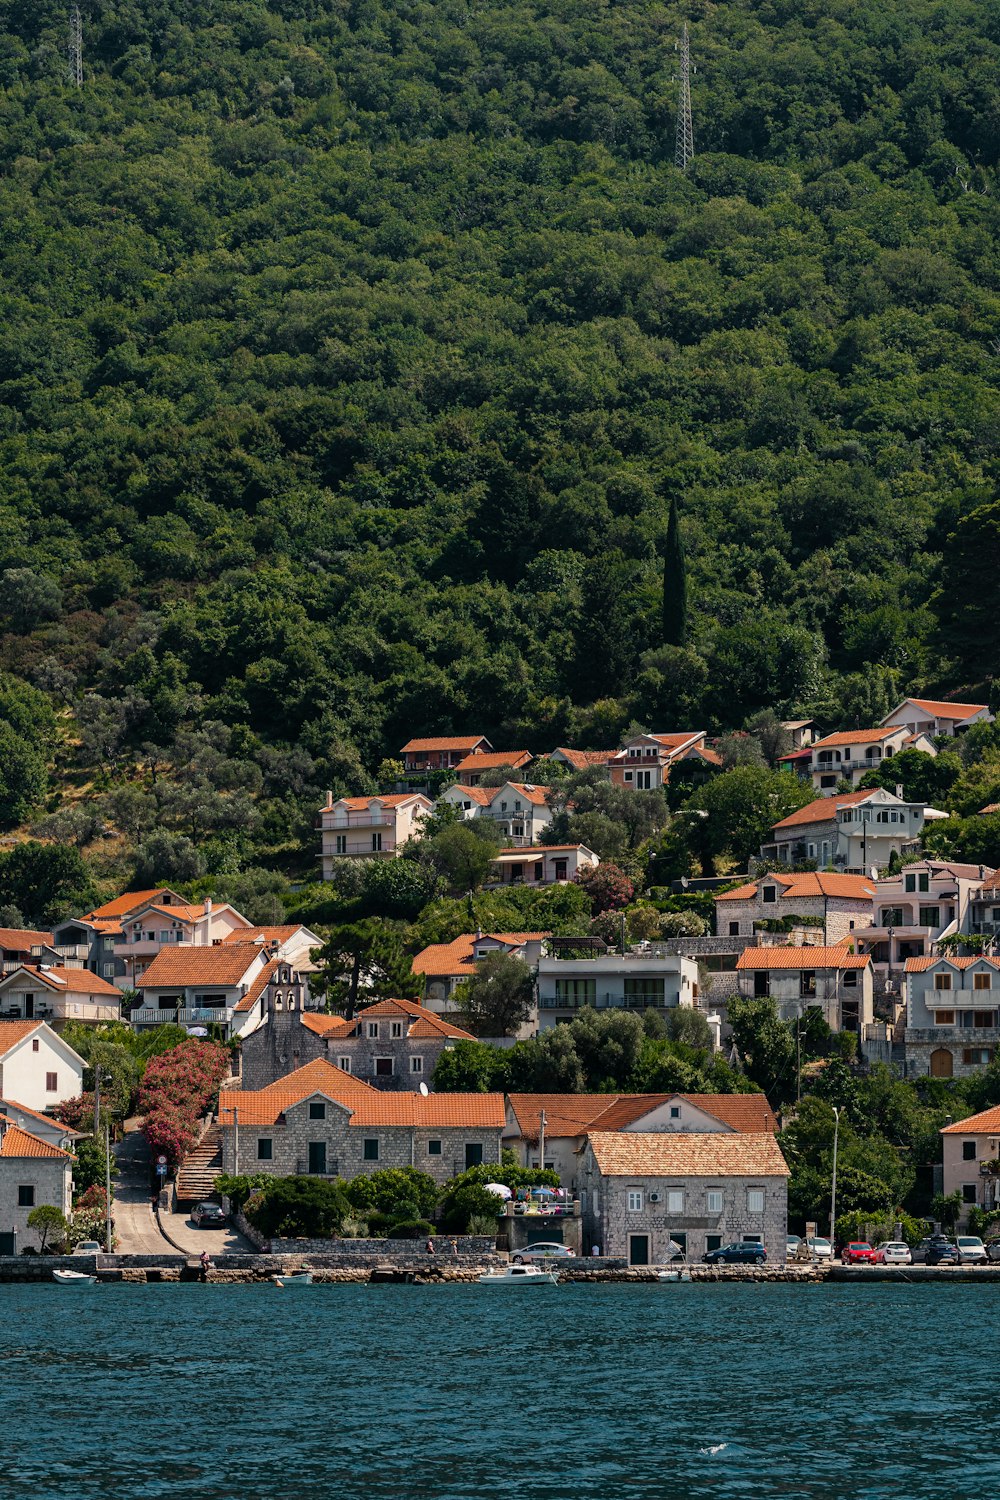 a view of a small village on a hill